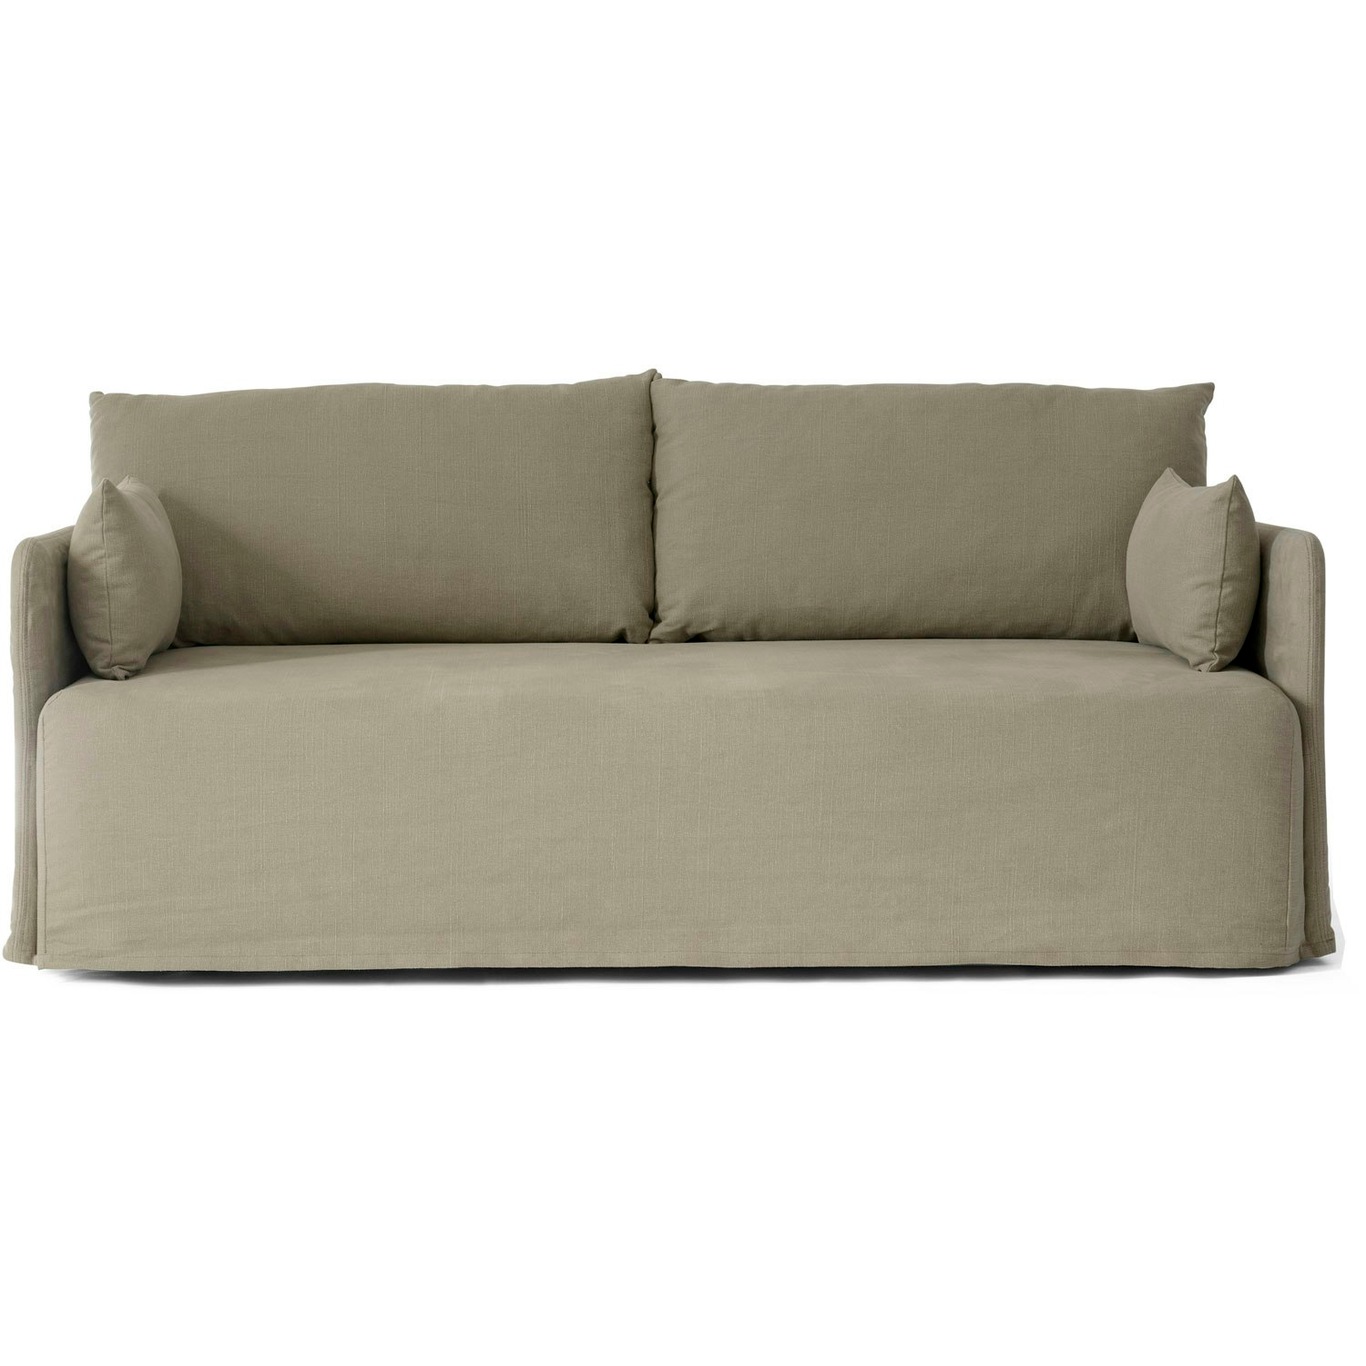 Offset Sofa 2-Seater Removable Upholstery Cotlin, Poppy Seed